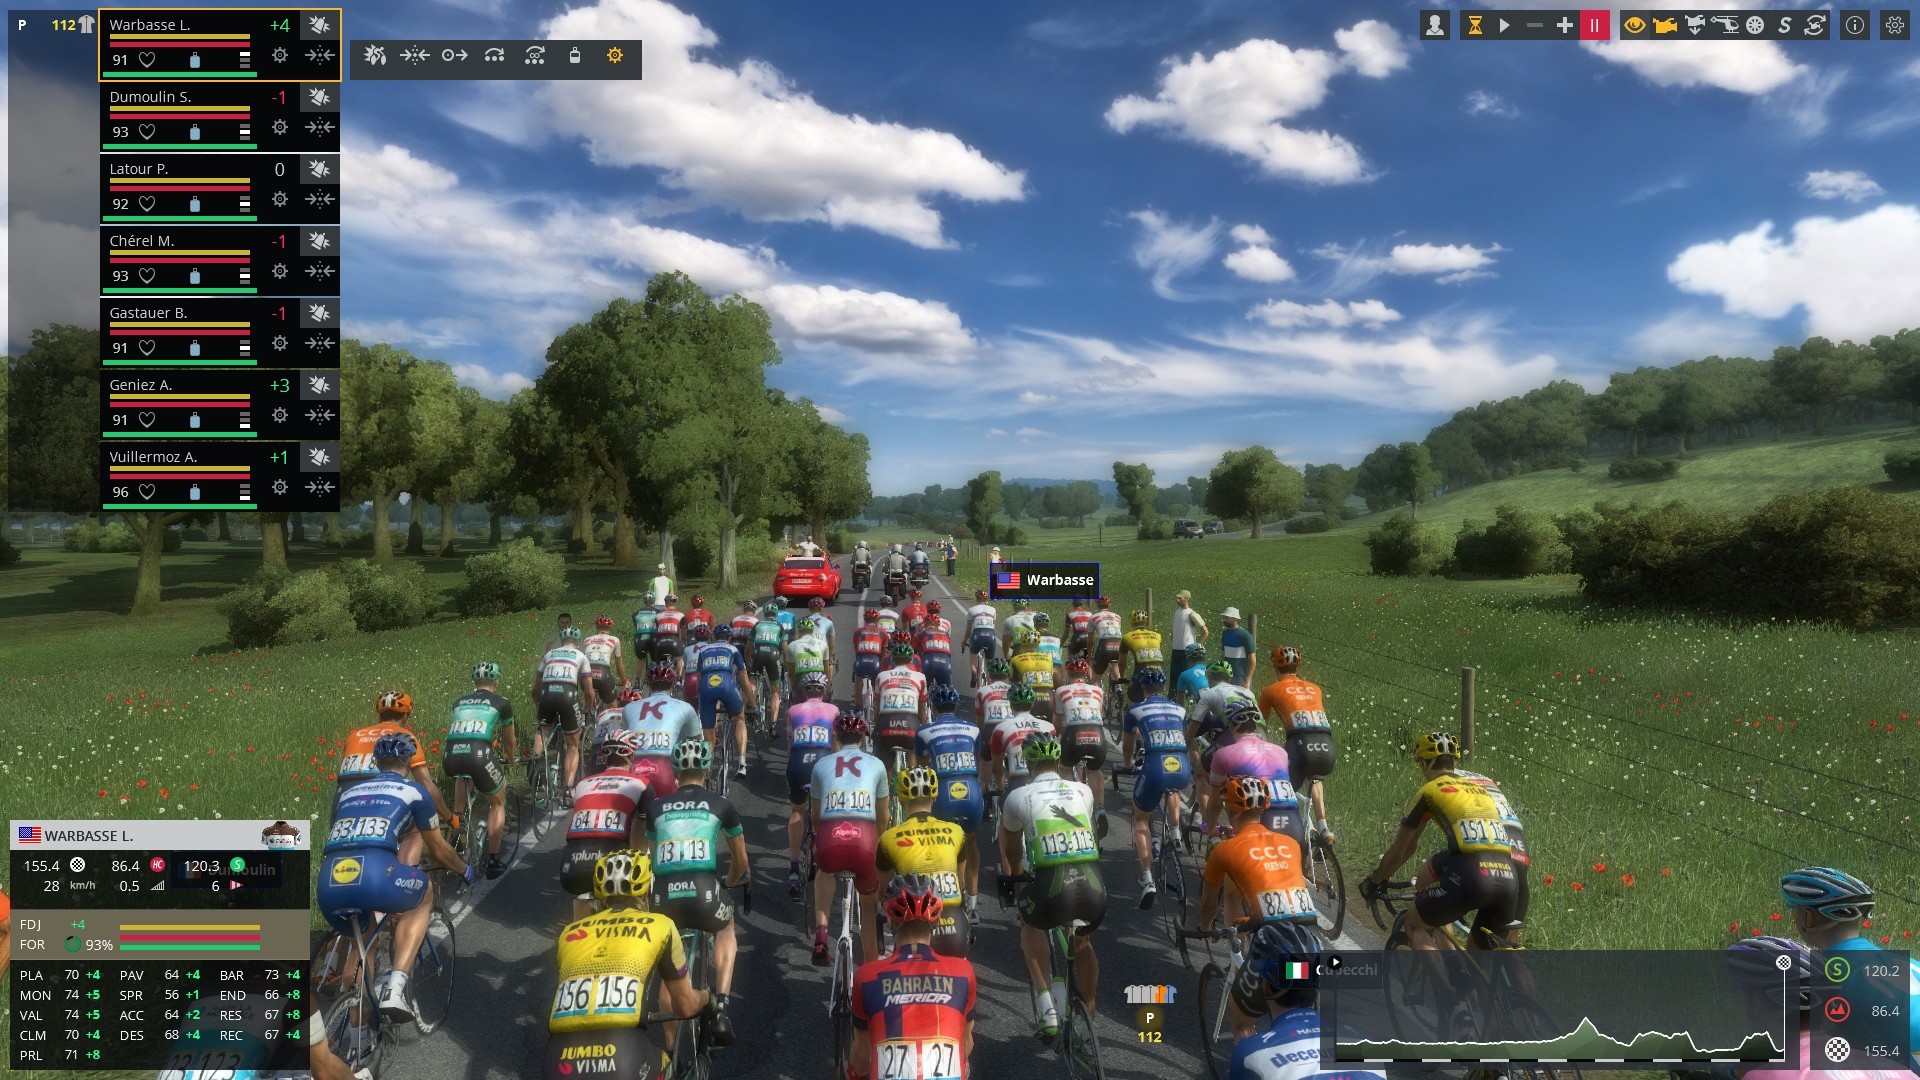 Pro Cycling Manager 2019 - Stage and Database Editor screenshot